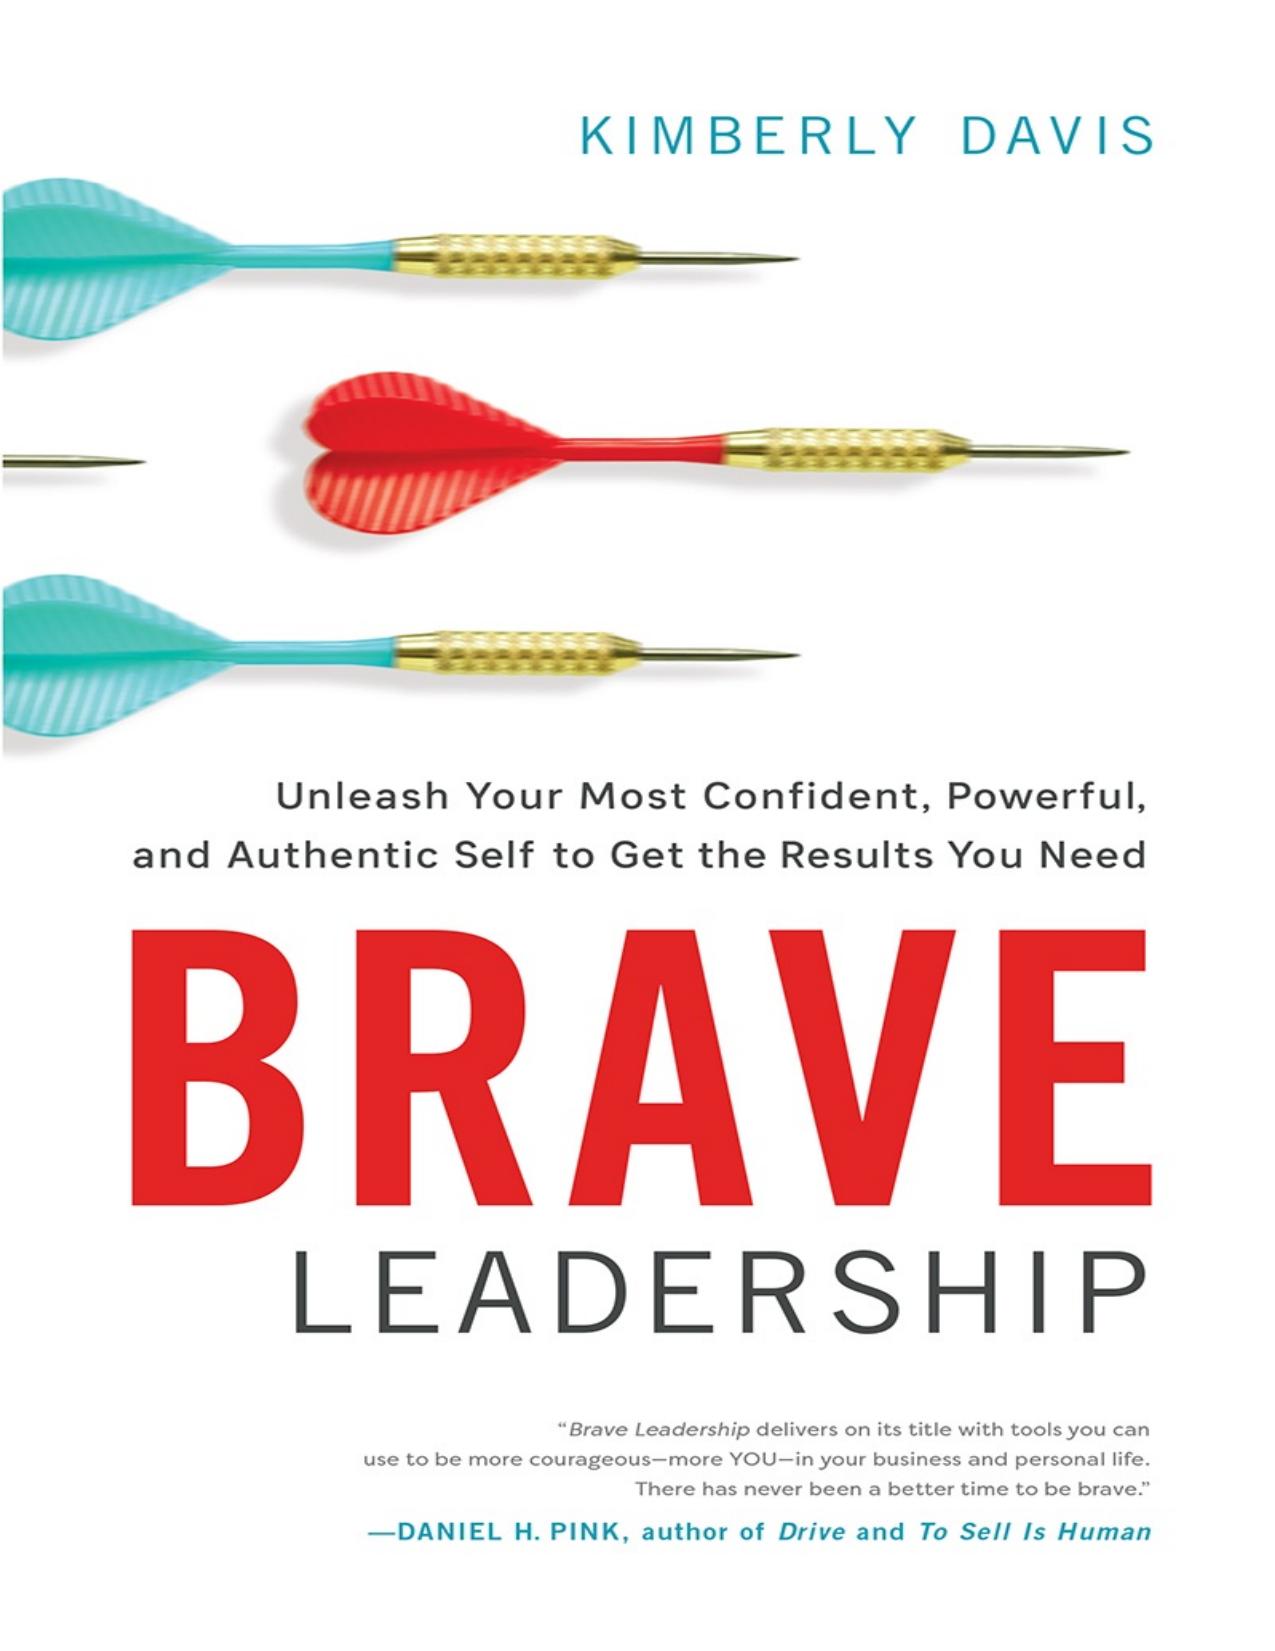 Brave Leadership: Unleash Your Most Confident, Powerful, and Authentic Self to Get the Results You Need - PDFDrive.com